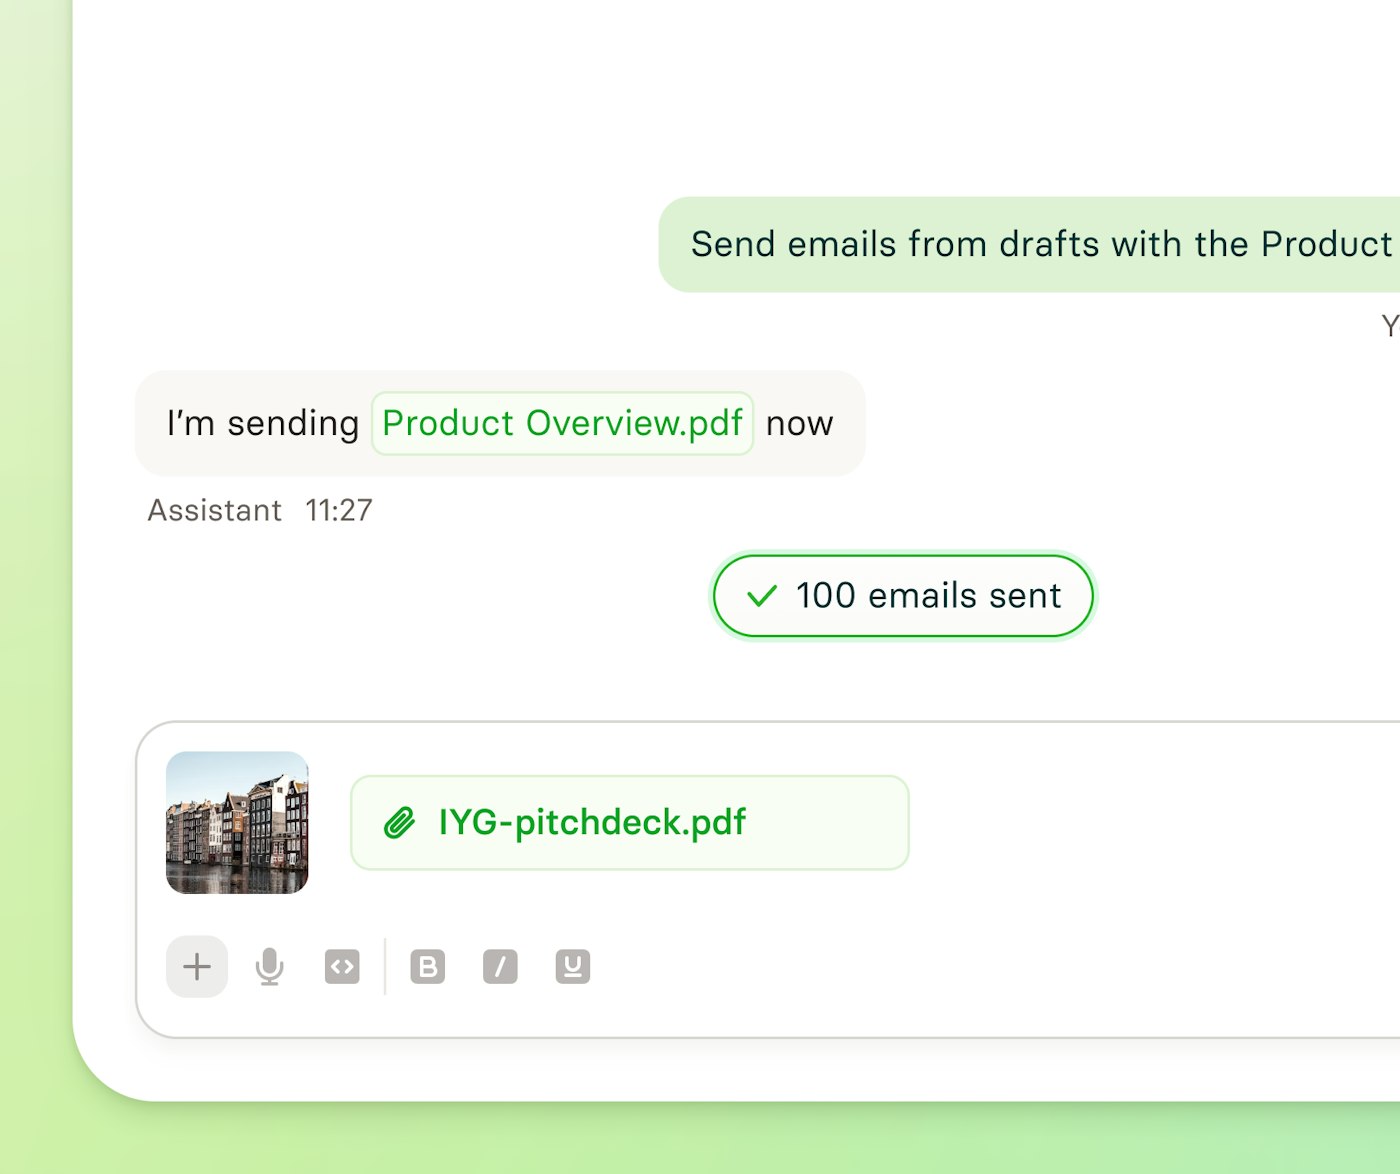 Chat like interface that shows gray and green speech bubbles on a white background.